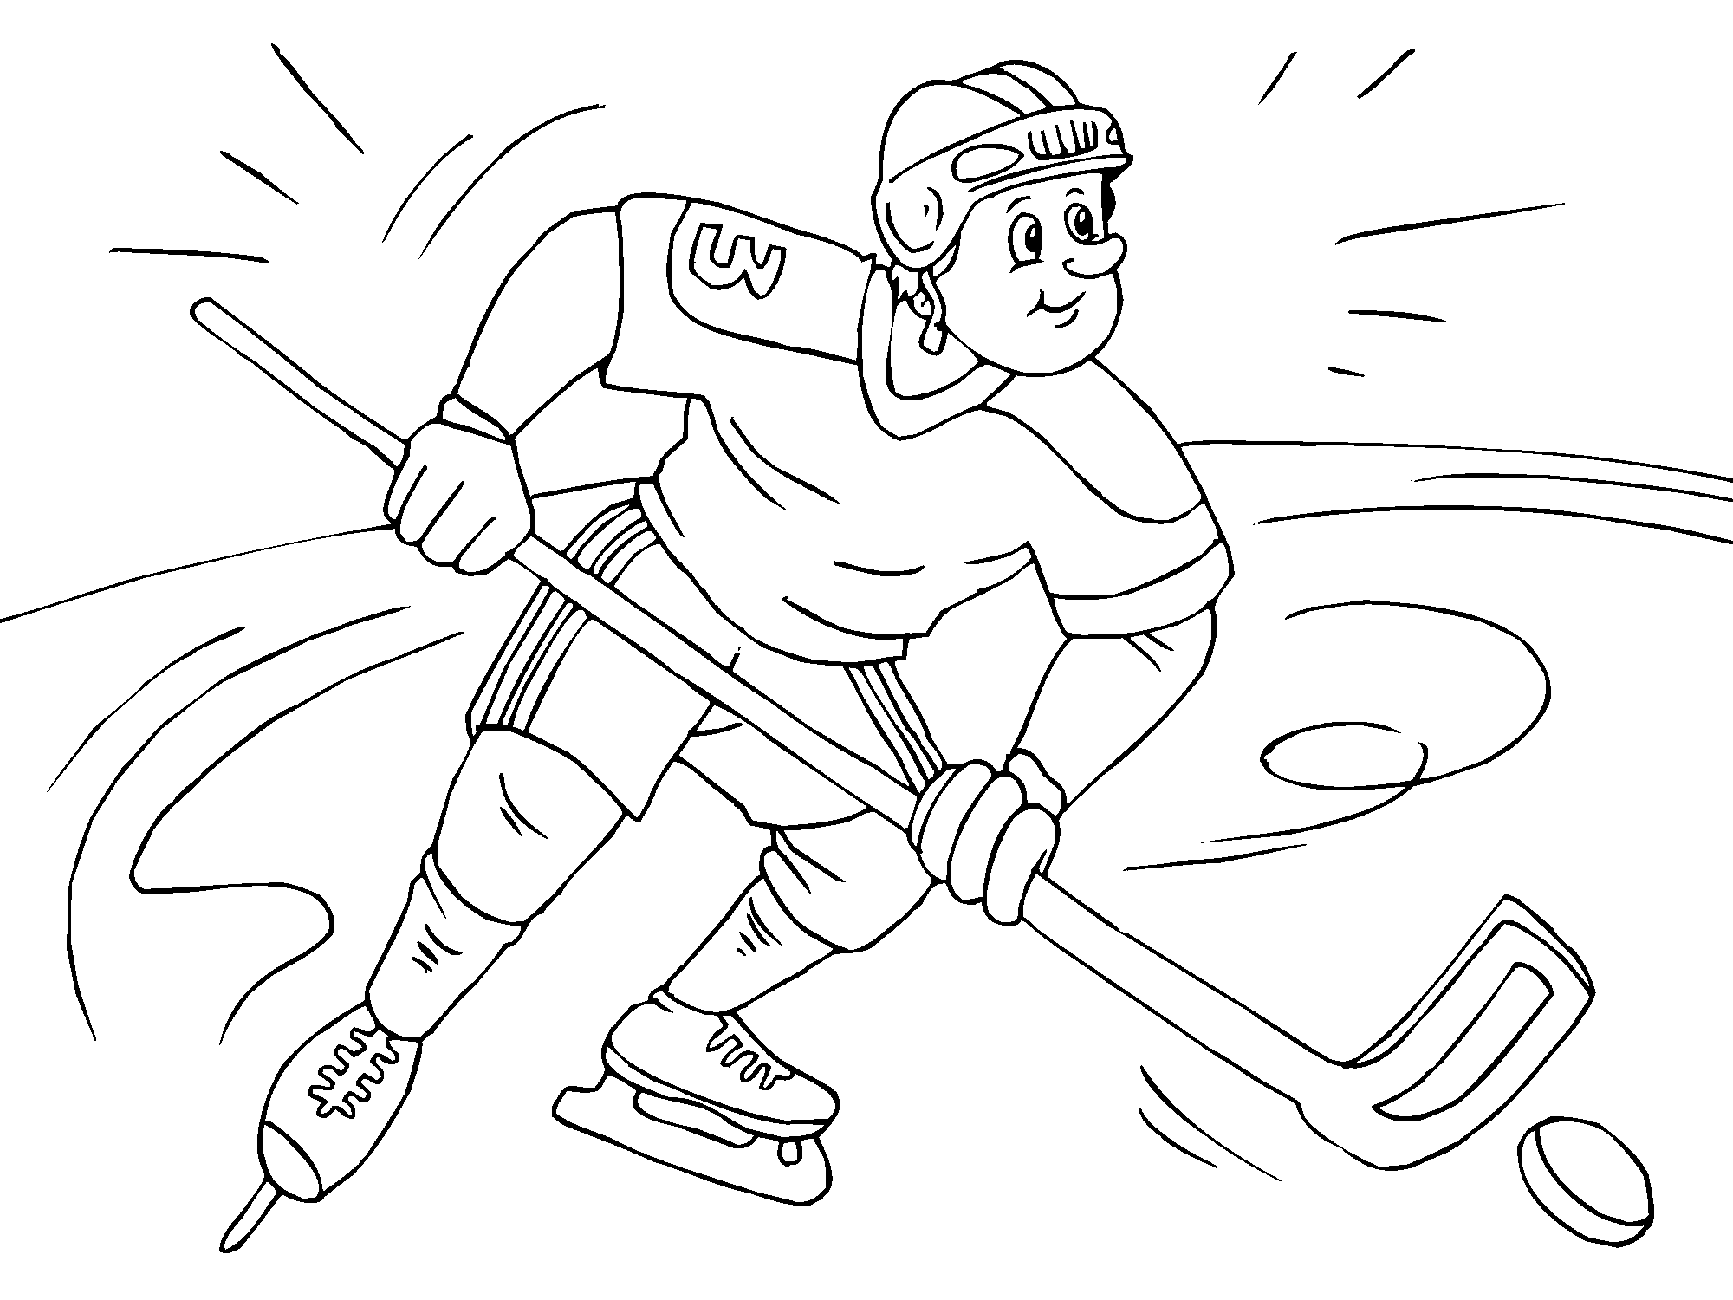 hockey-coloring-pages-printable-free-printable-word-searches